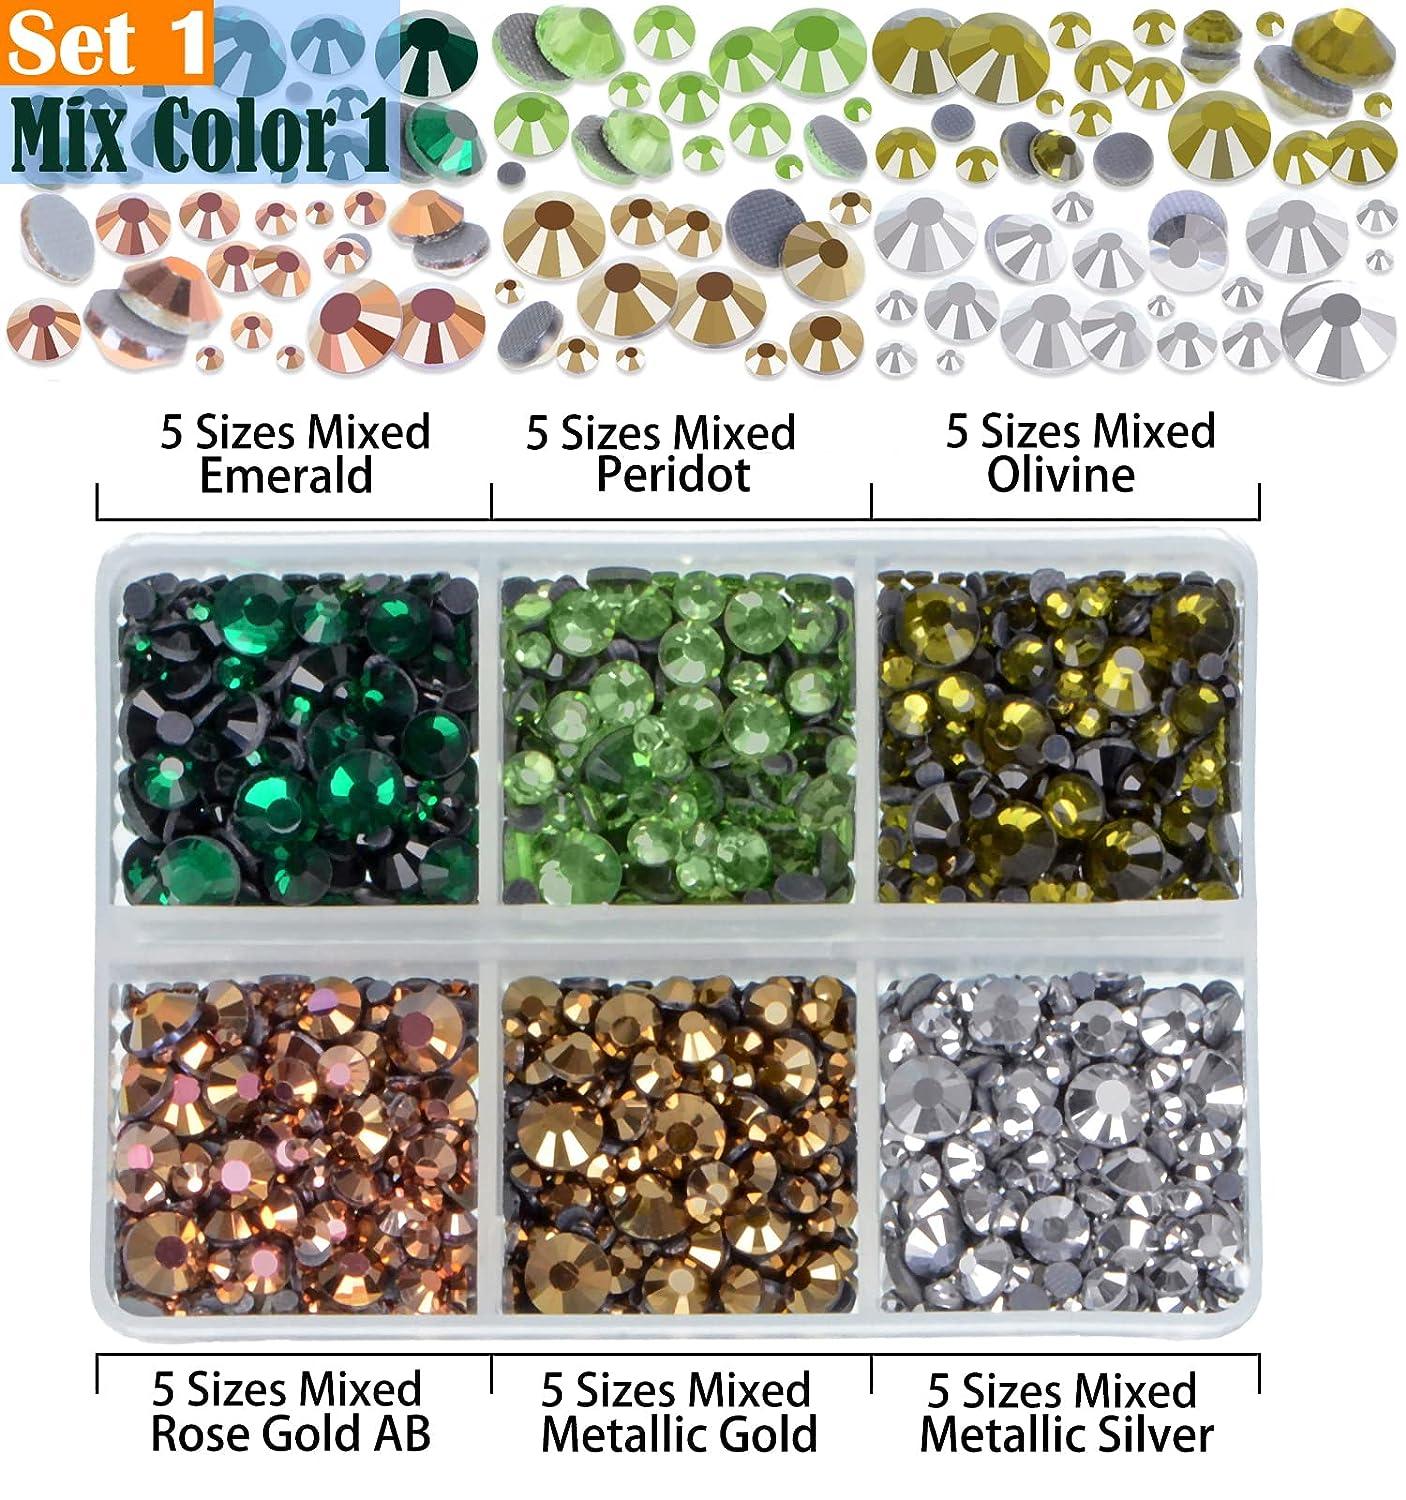 Hot Fix Korean Rhinestones - Size SS20 - By the Ounce